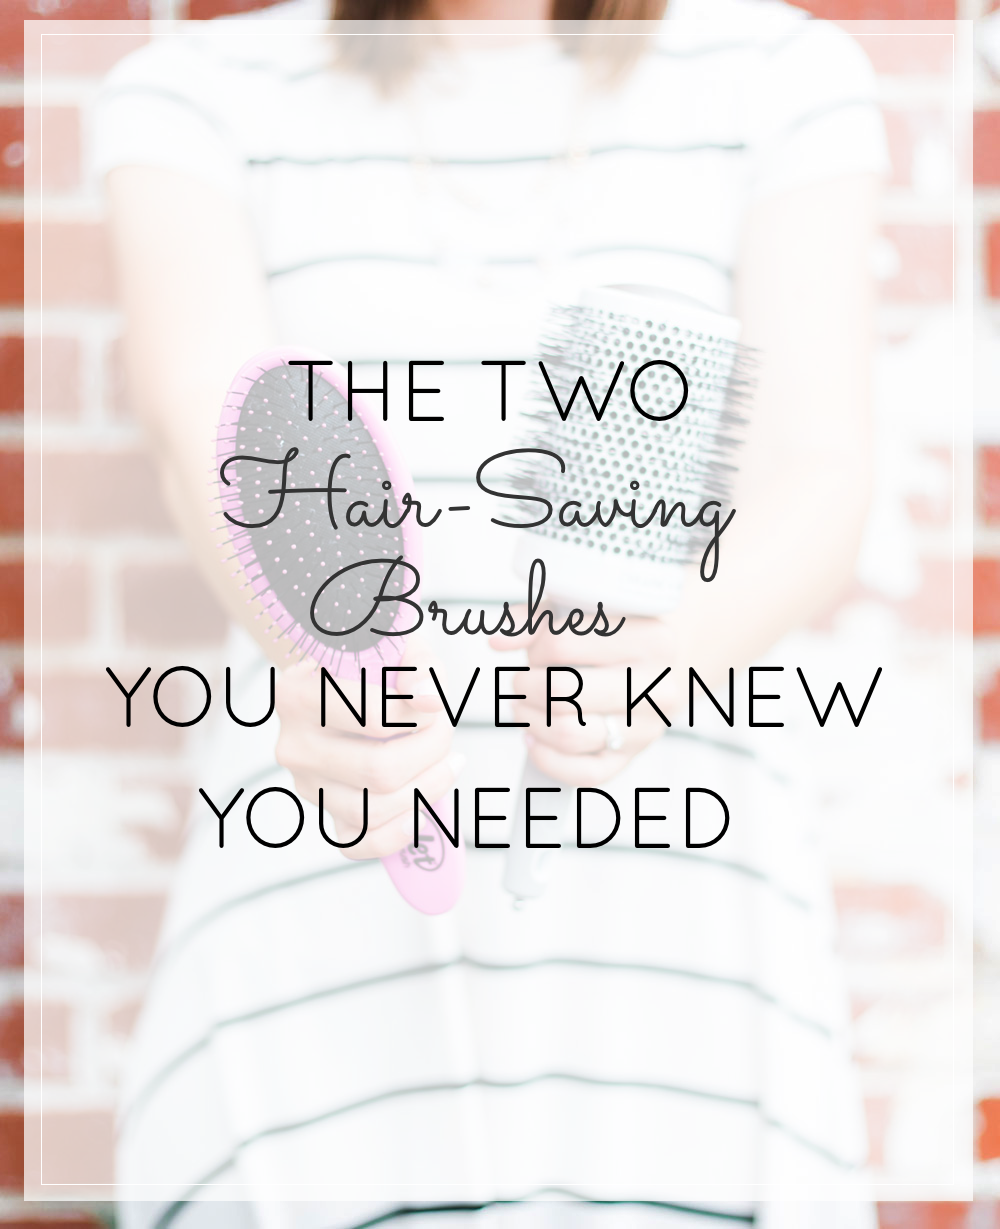 The Two Hair-Saving Brushes You Never Knew You Needed (Seriously, this beauty secret is life-changing, and stylist-approved. Click through for your two new secret weapons!)